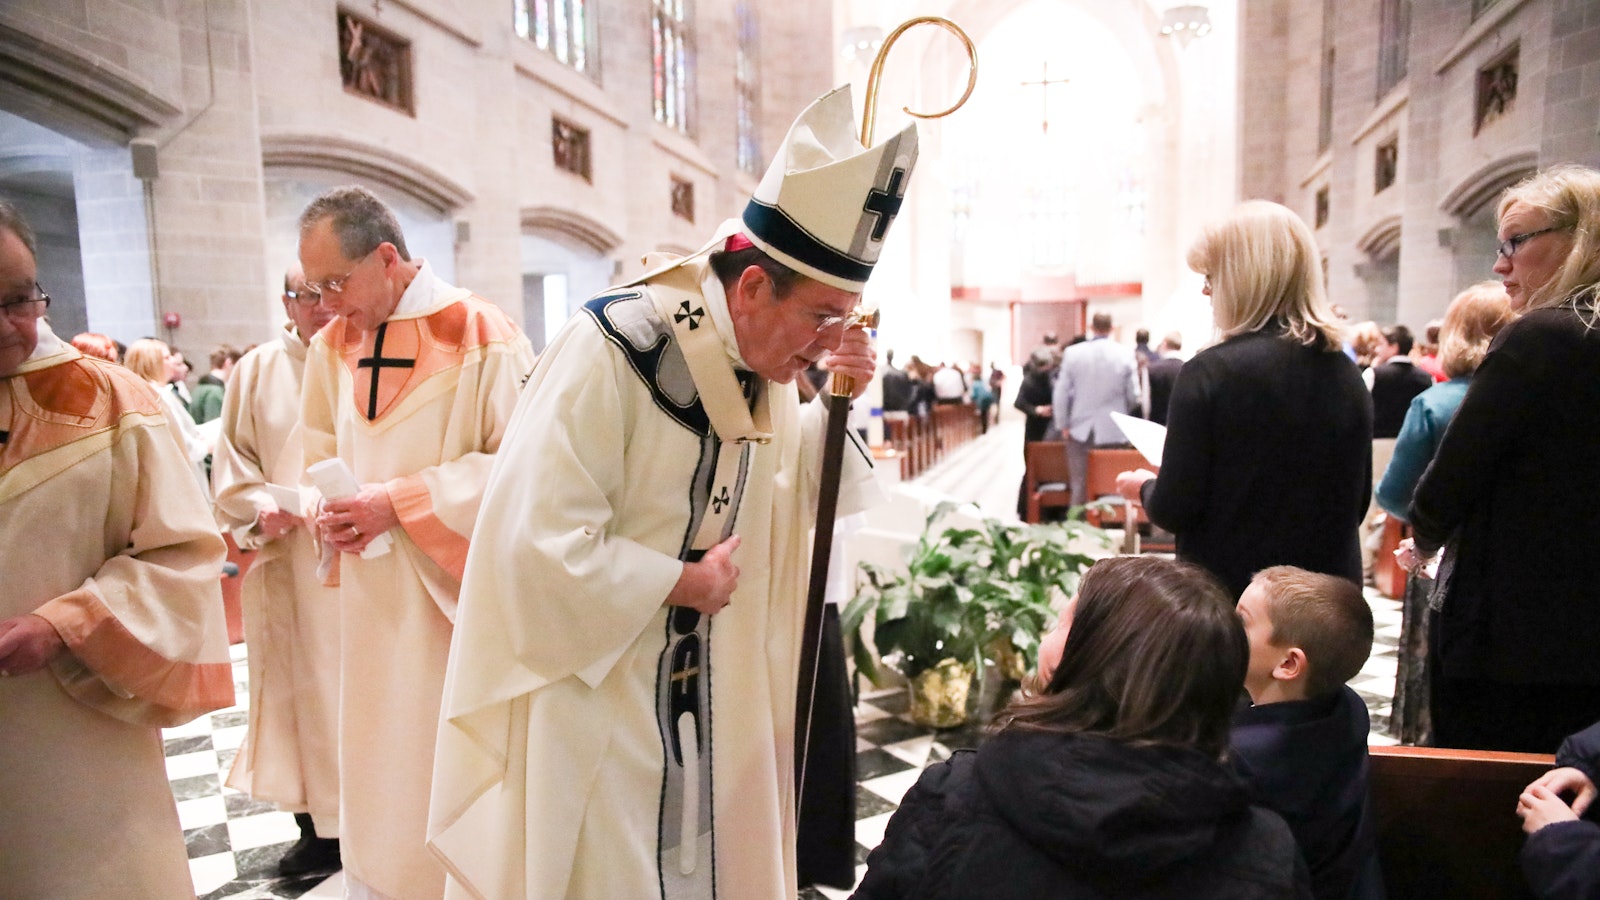 Archbishop Vigneron stops to talk to a young student during the annual Catholic Schools Week Mass at the Cathedral of the Most Blessed Sacrament on Jan. 31, 2018. (Naomi Vrazo | Detroit Catholic file photo)